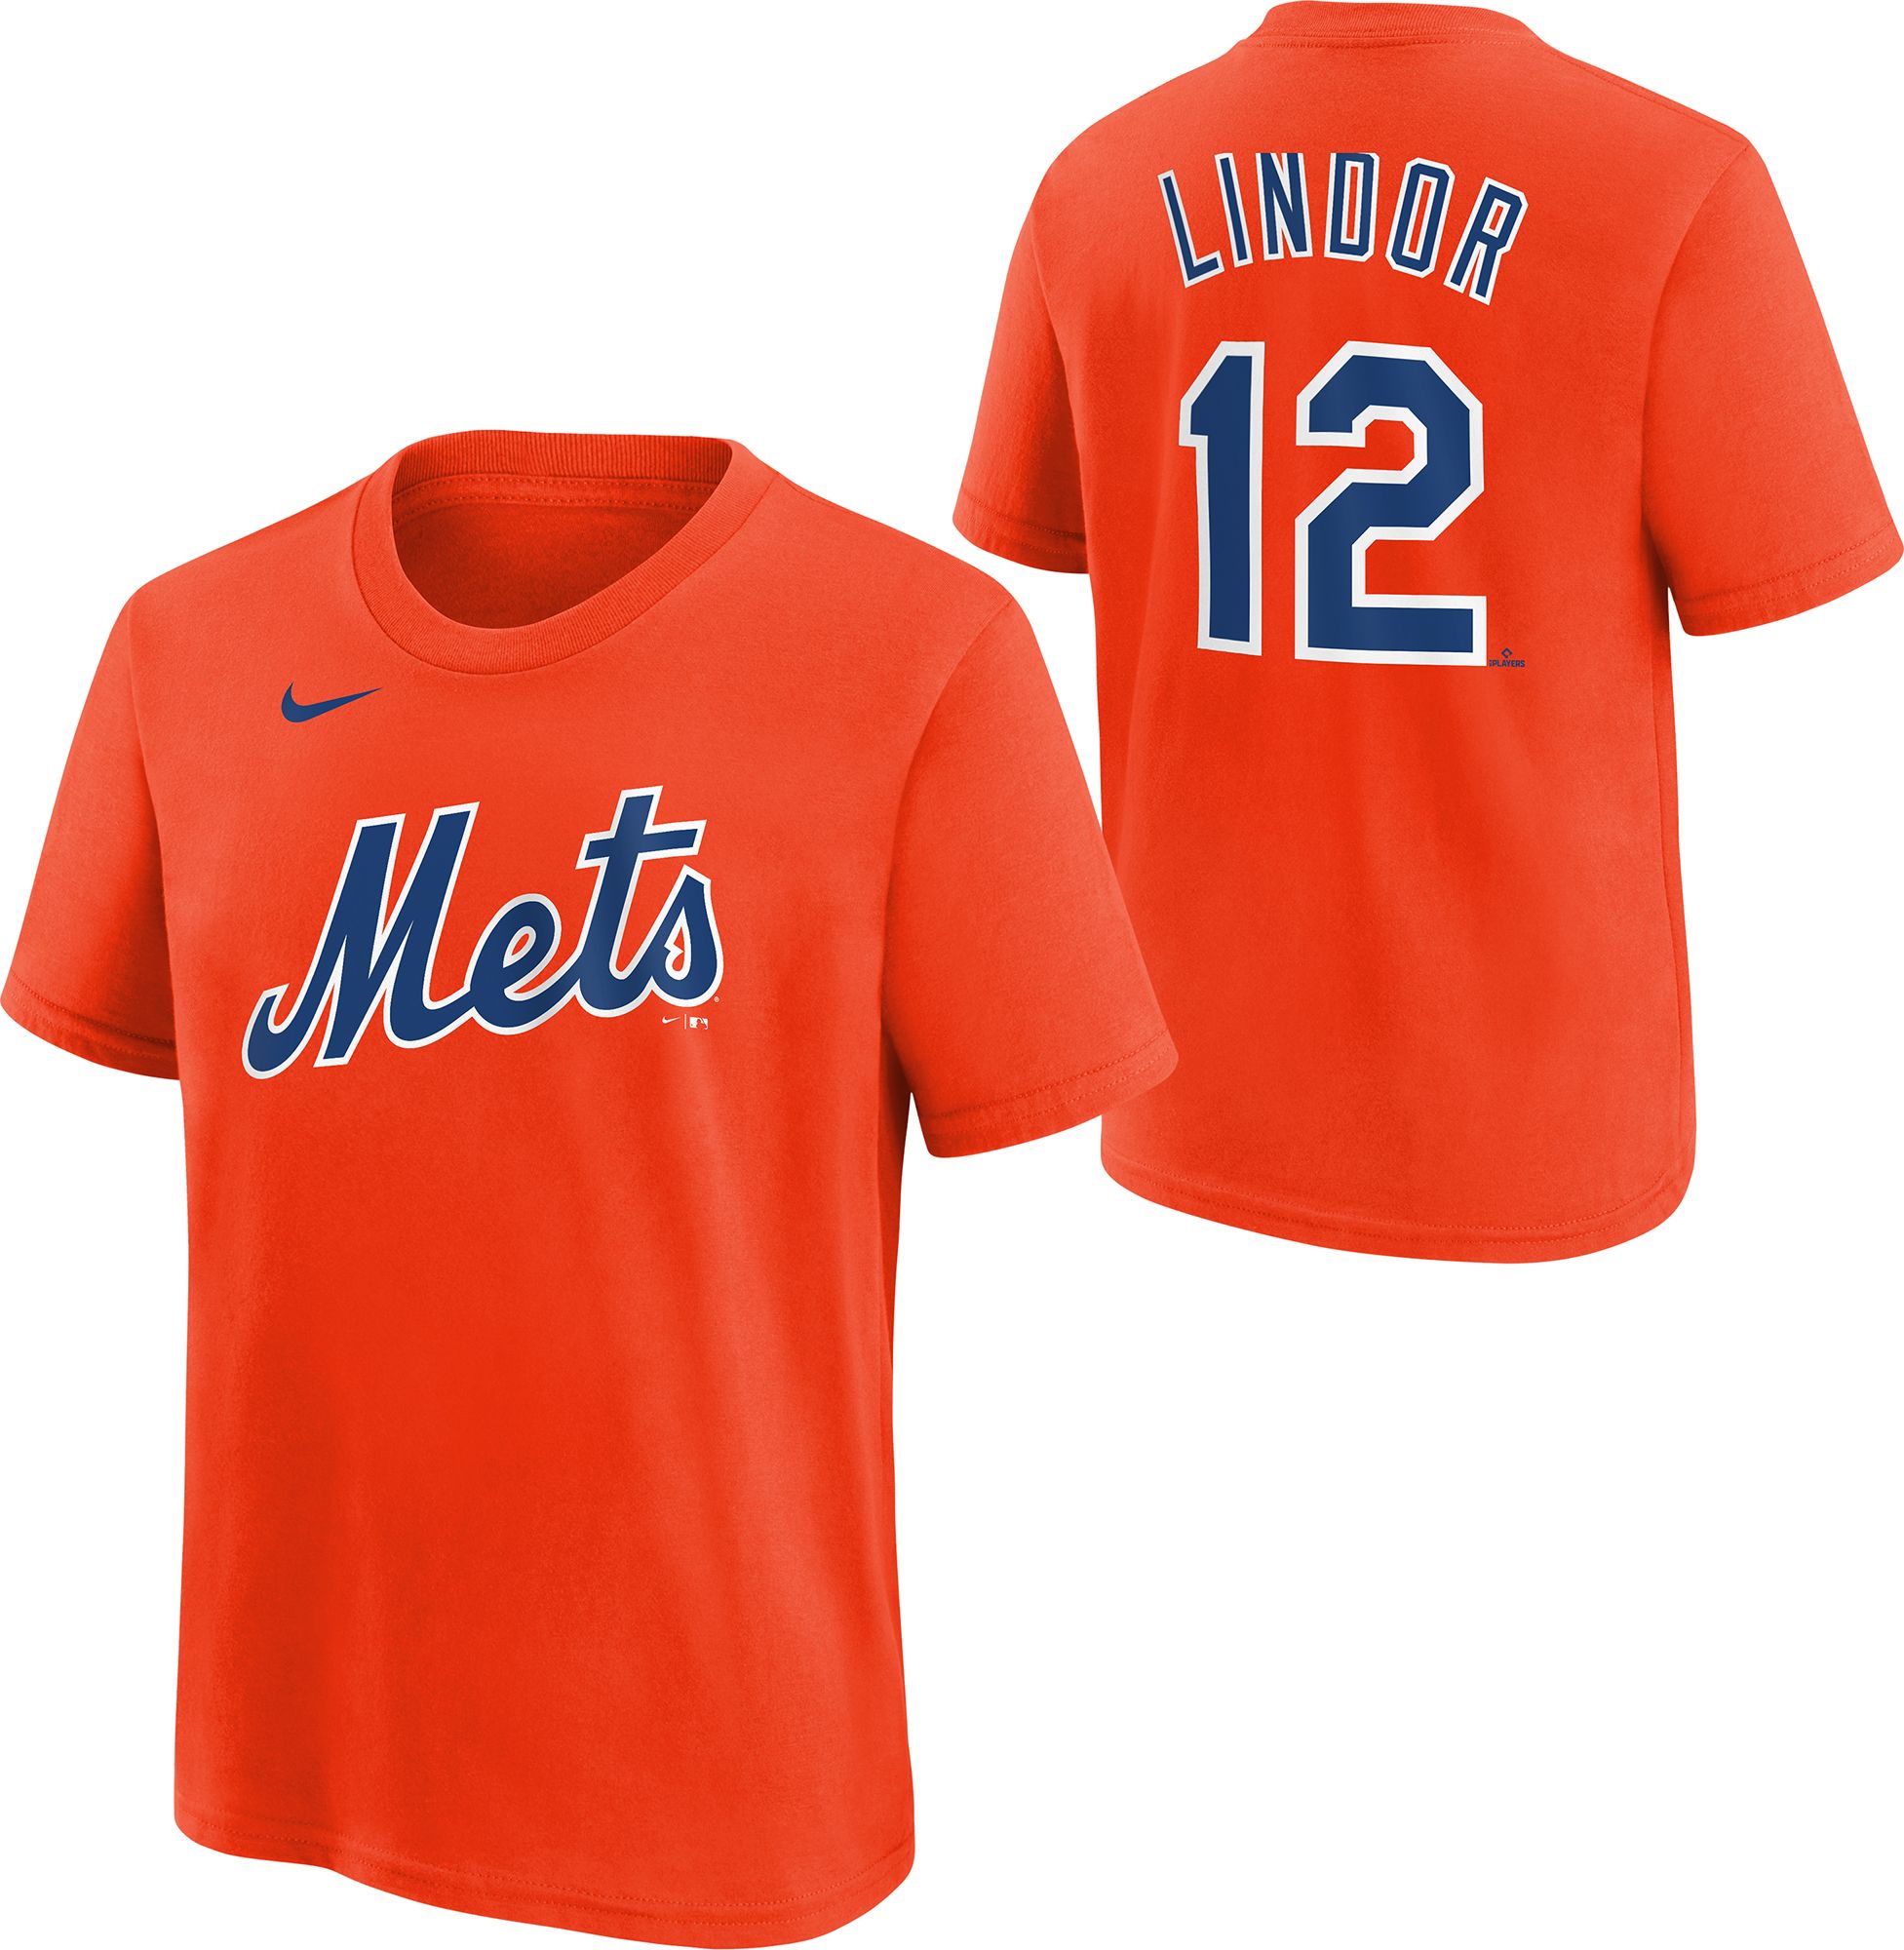 francisco lindor mets jersey youth